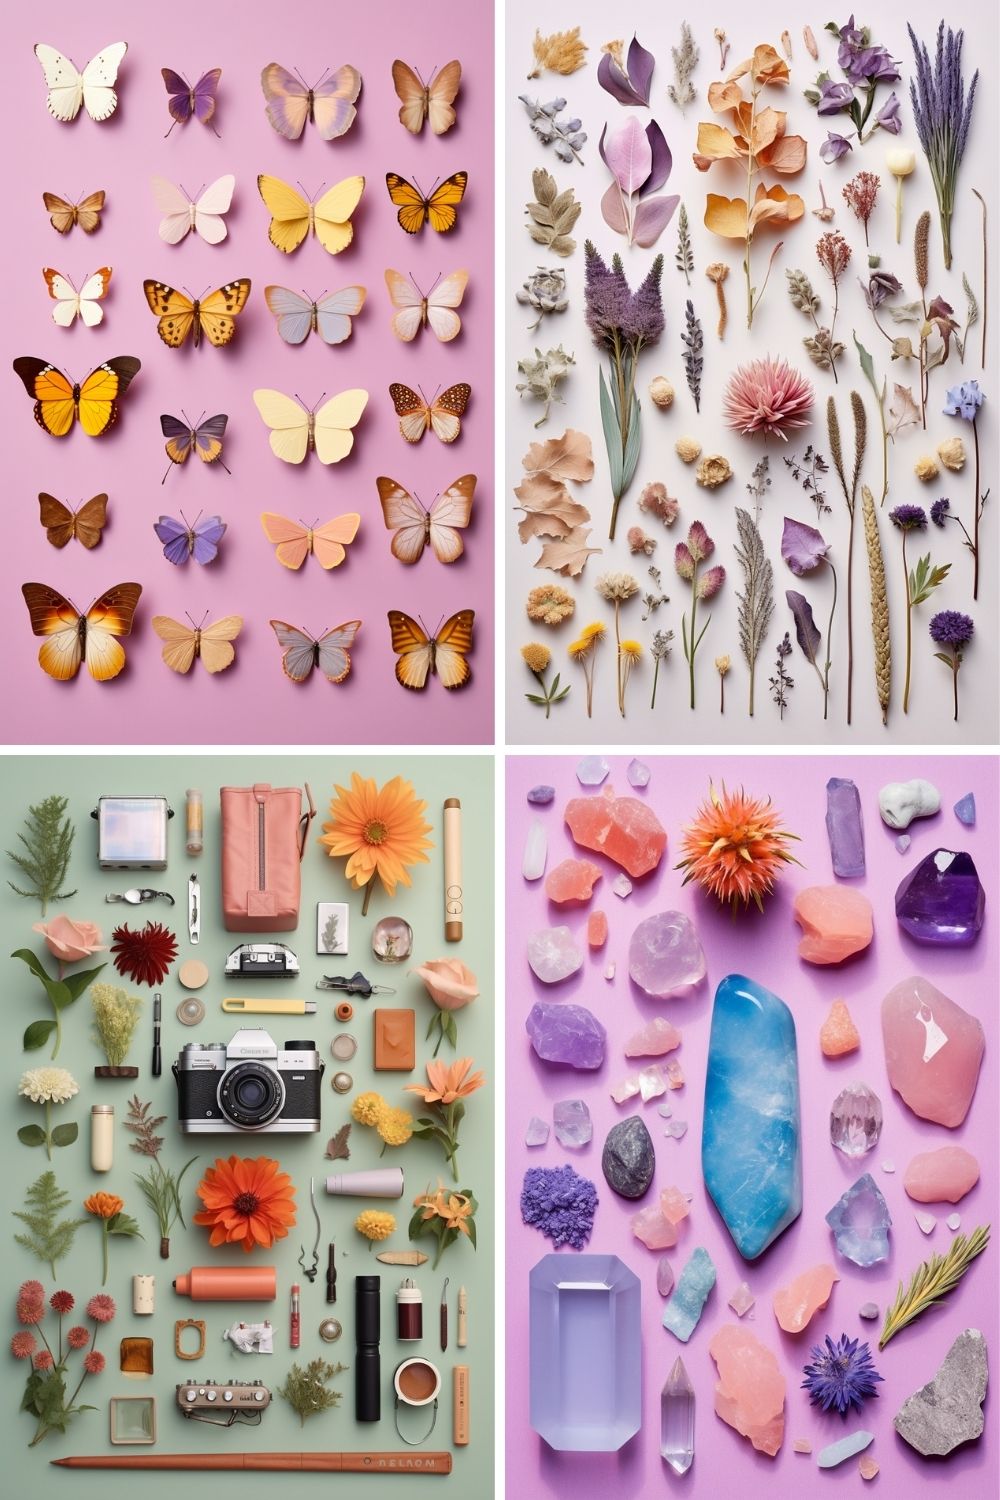 KNOLLING PHOTOGRAPHY - Best Creative Unique Midjourney Prompt Ideas To Spark Your Creativity - Sprinkle of AI Image Prompt Set 10